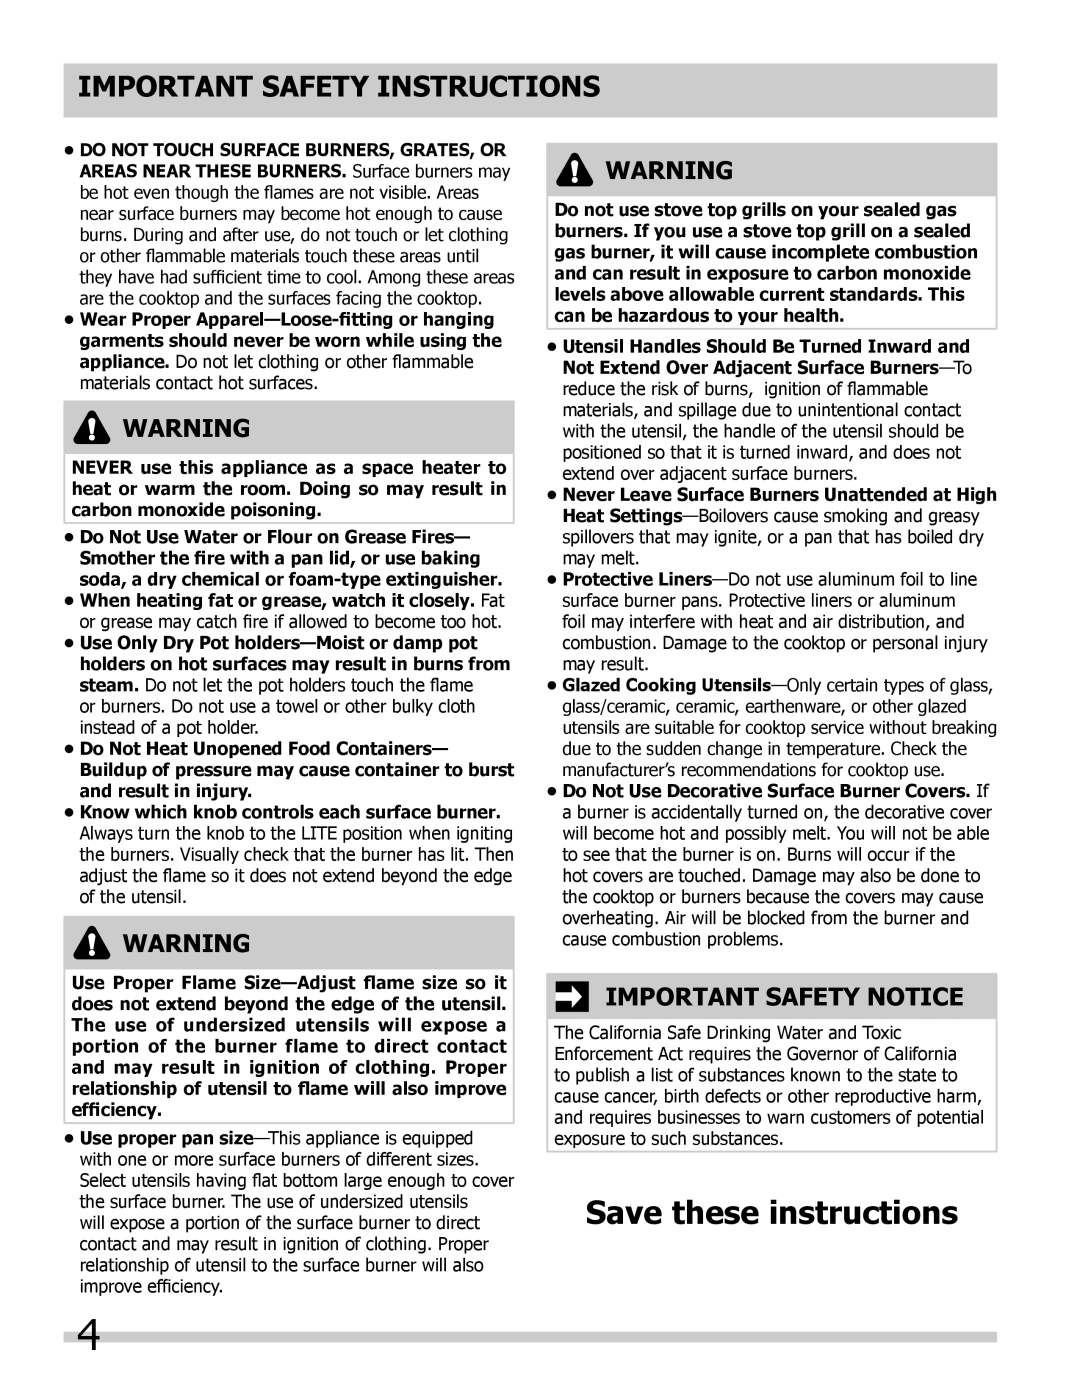 Frigidaire FFGC3005LW, FFGC2605LW Important Safety Notice, Do Not Heat Unopened Food Containers, Save these instructions 